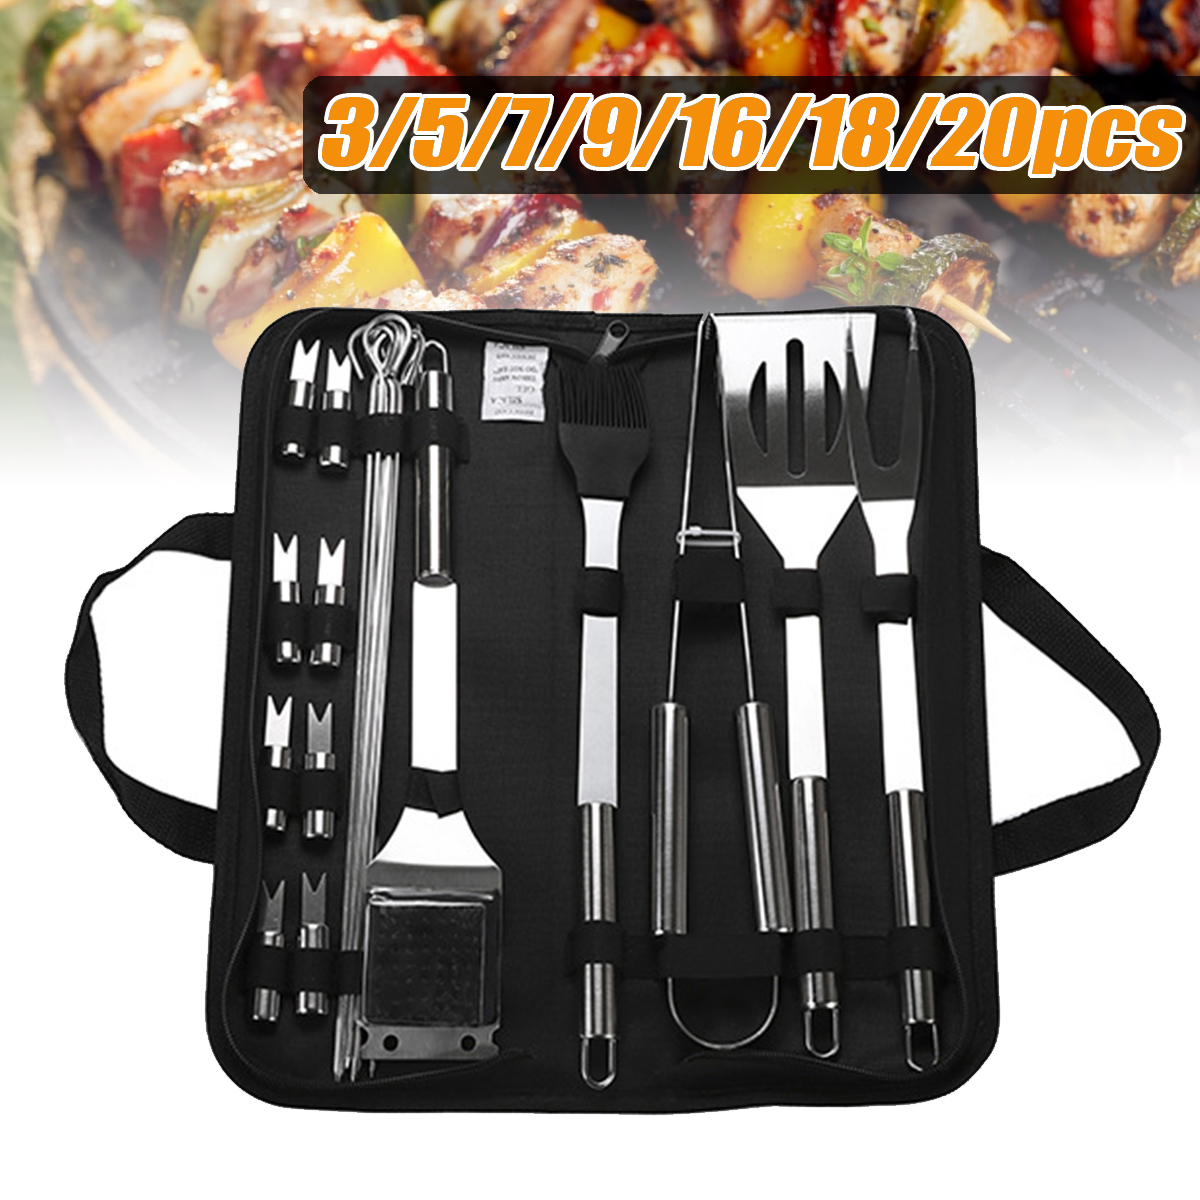 Stainless-Steel-BBQ-Tools-Set-Barbecue-Grilling-Utensil-Accessories-Camping-Outdoor-Cooking-1676473-1